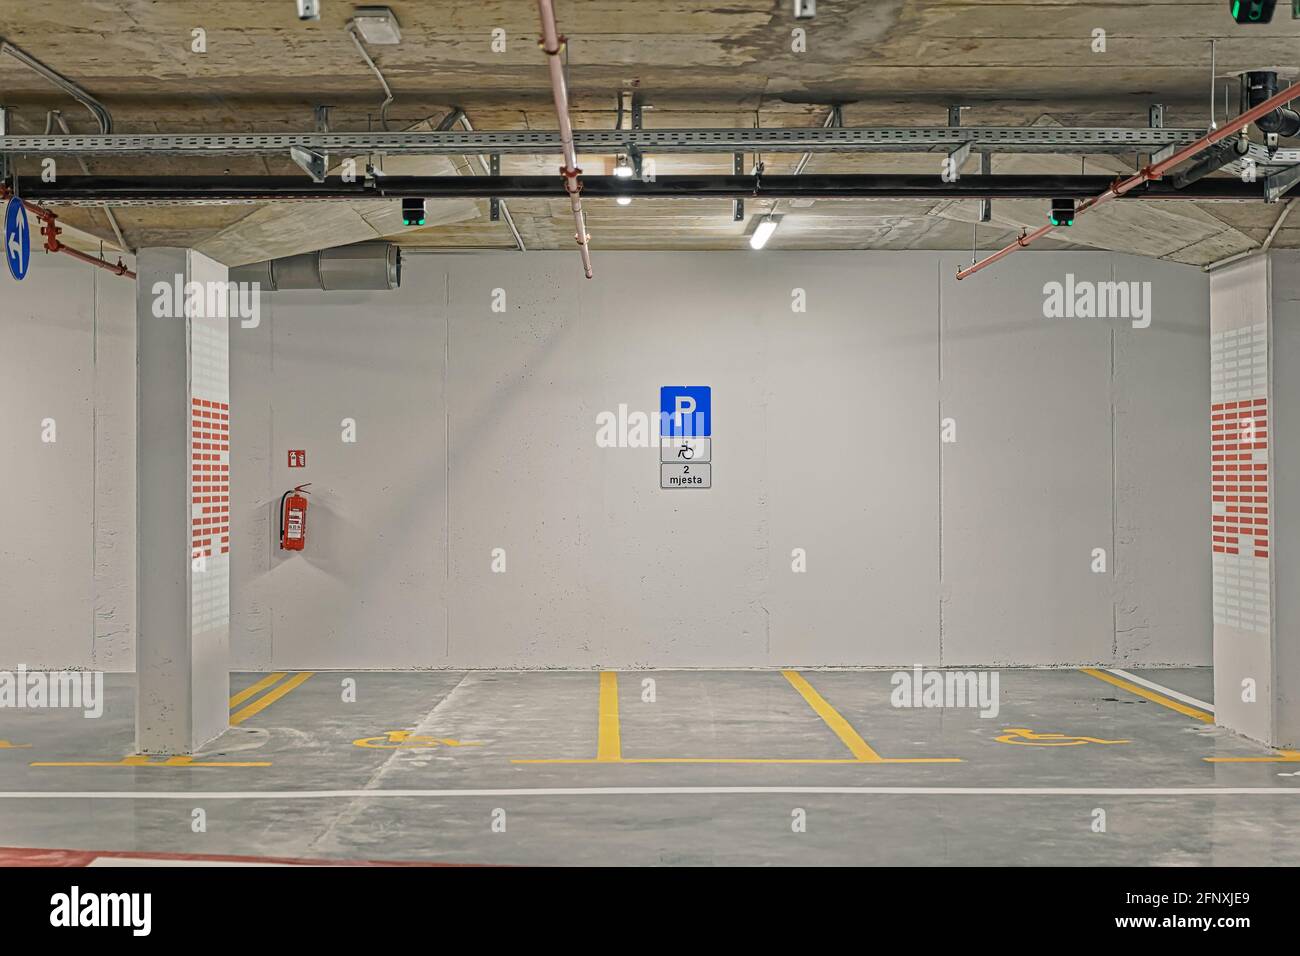 Public underground garage interior with parking spaces for disabled people Stock Photo